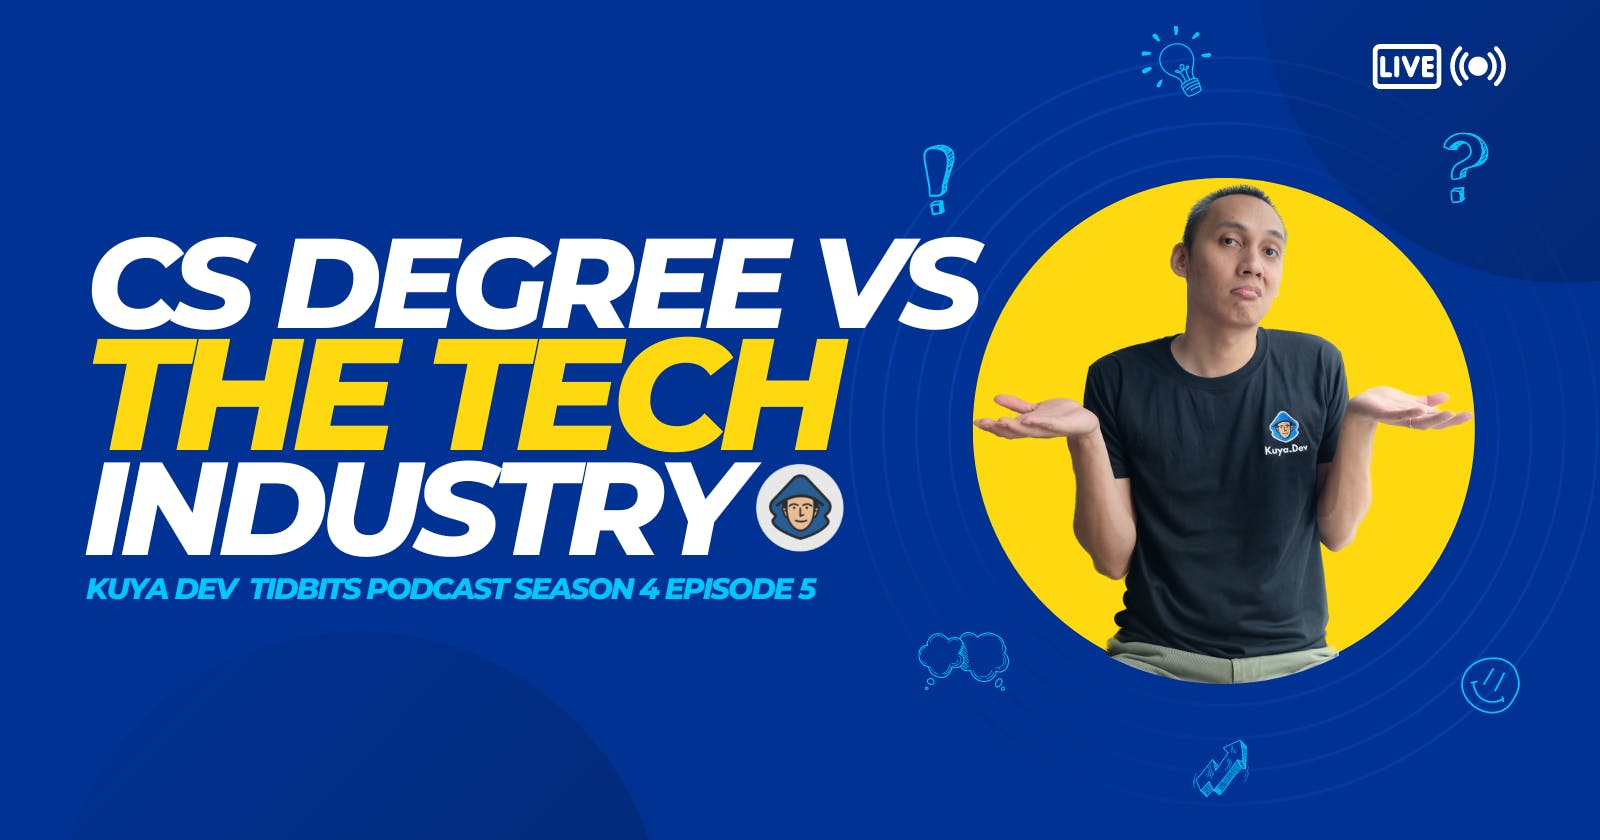 The Computer Science Degree vs. The Tech Industry